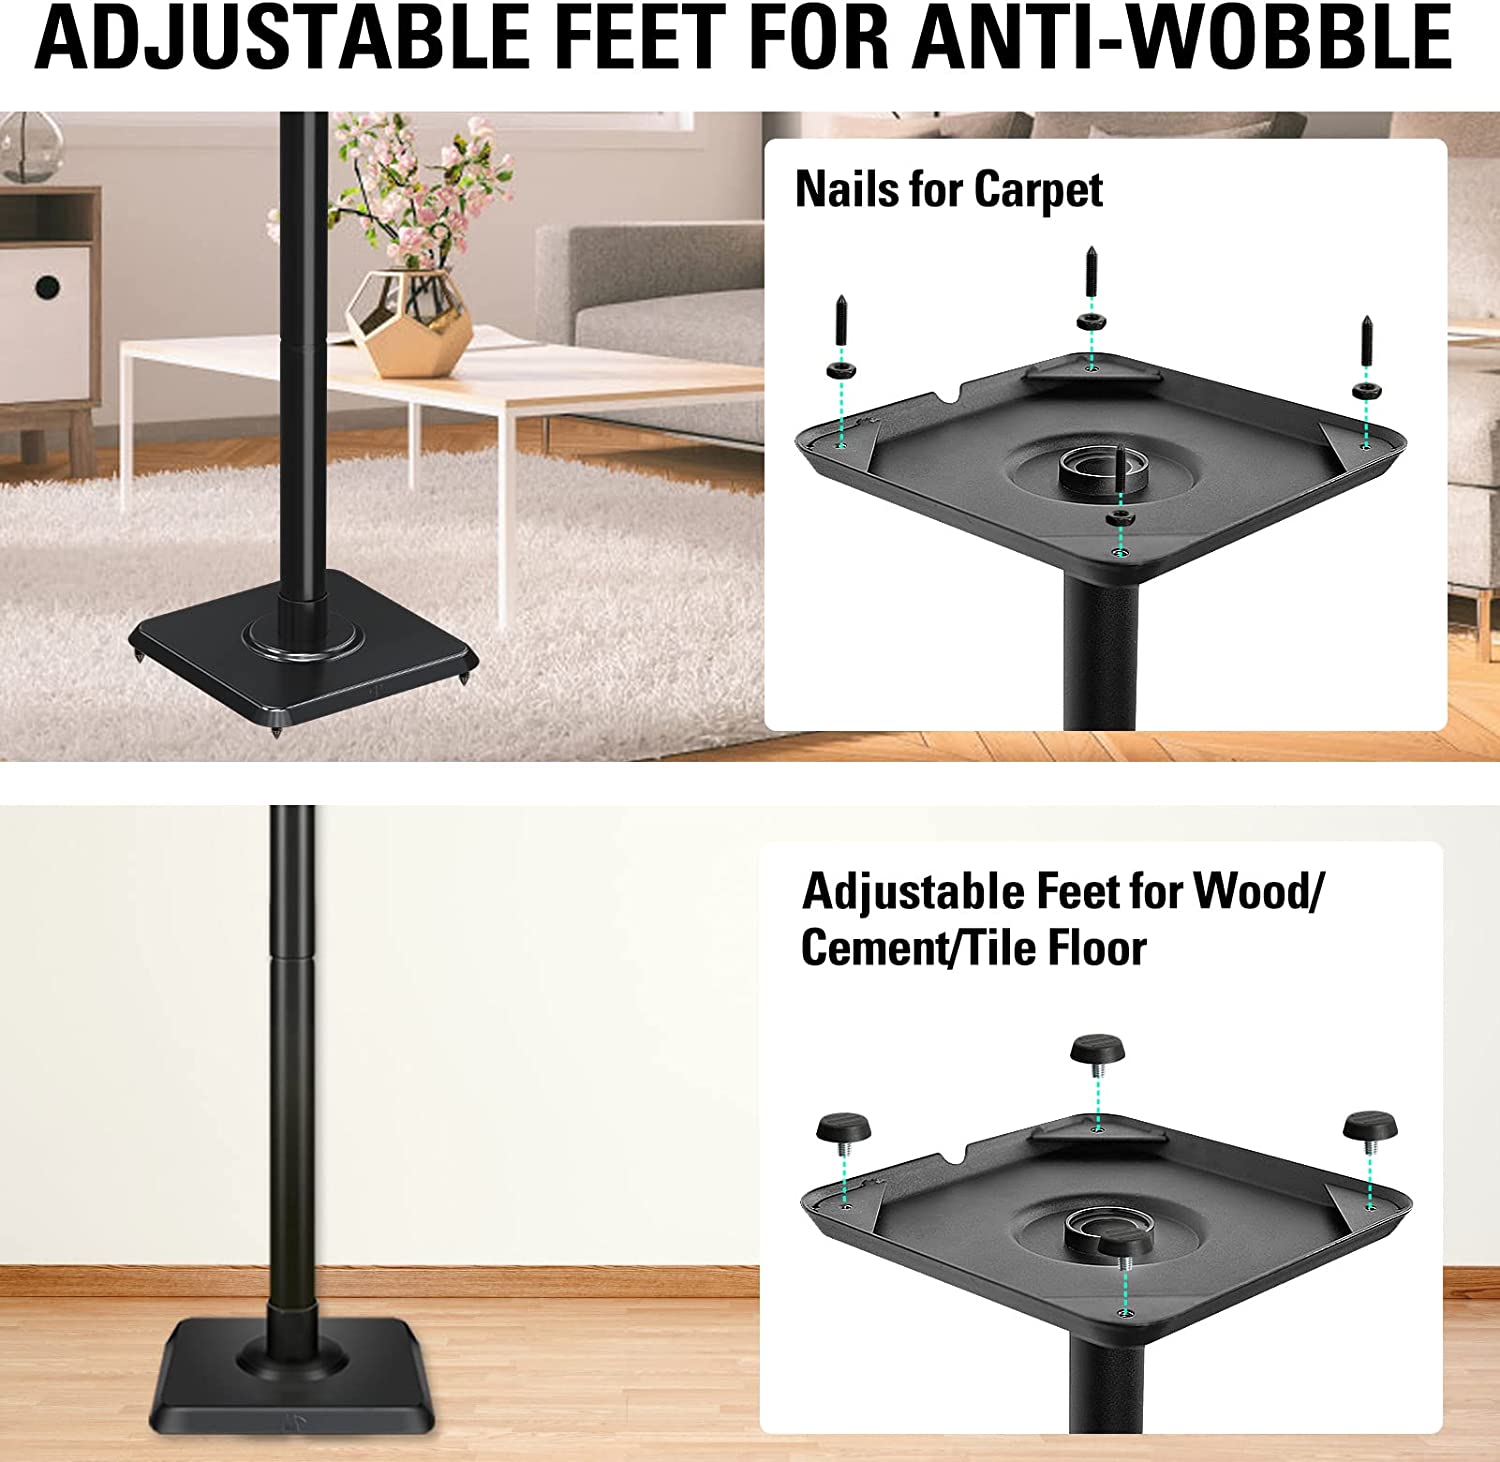 Mounting Dream Speaker Stands Height Adjustable for Satellite & Small Bookshelf Speakers, Set of 2 Floor Stand Mount for Bose Polk JBL Sony Yamaha and Others - 11LBS Capacity MD5402-4